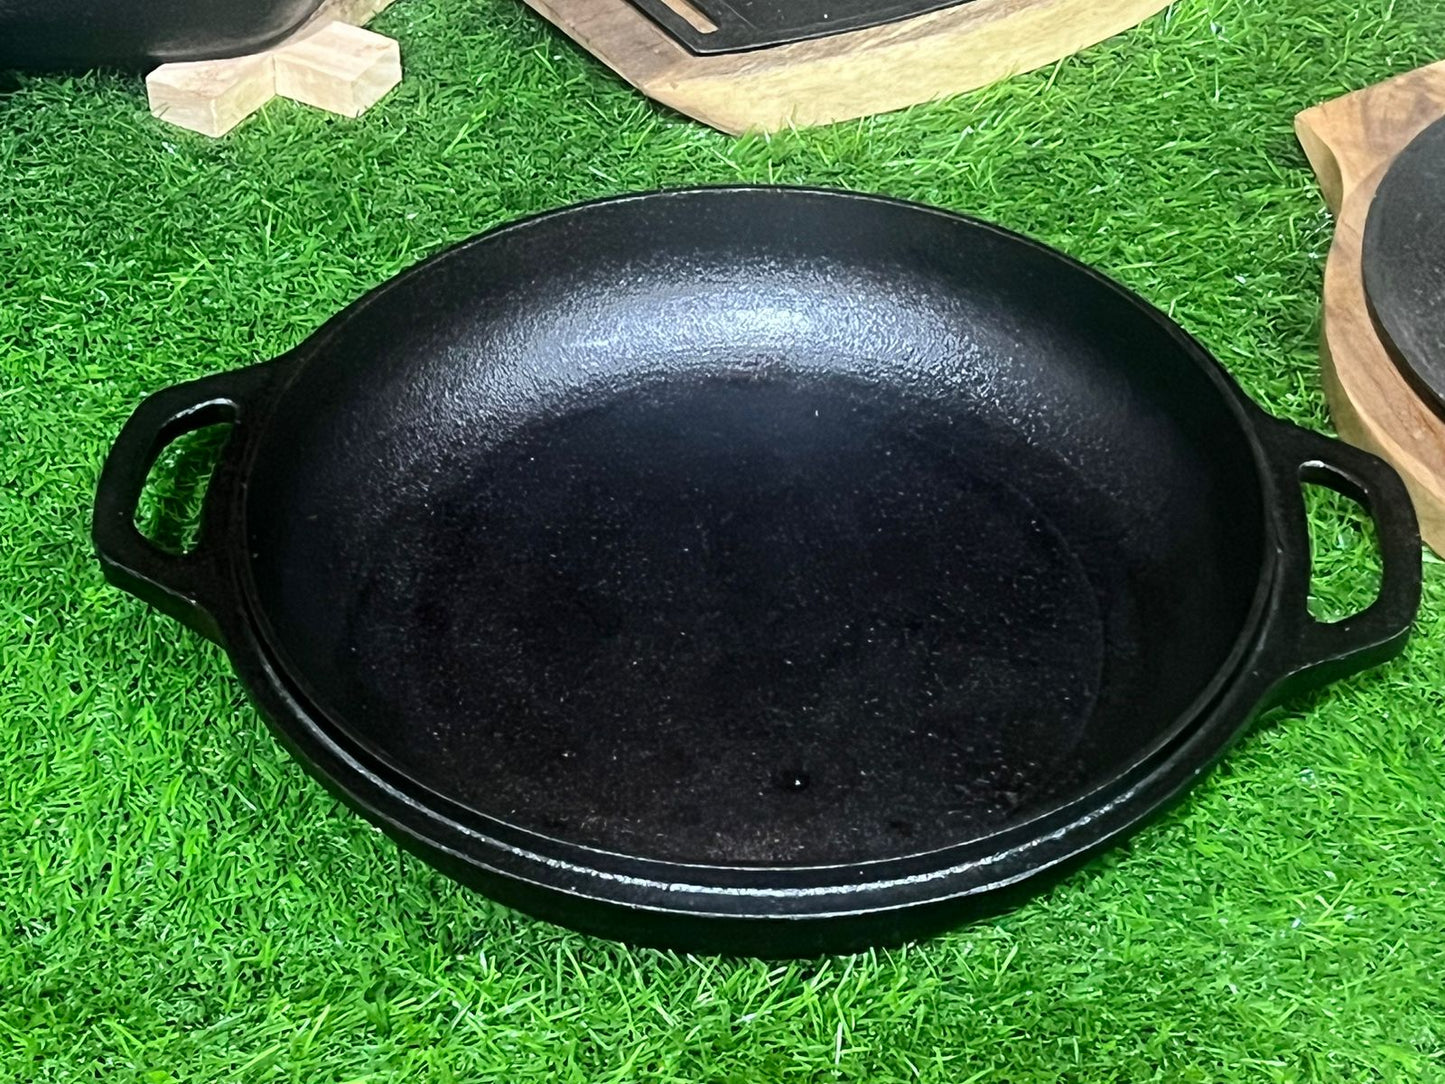 Cast Iron Skillet 9.5 Inch (24 CM), Double Grip Naturally Non Stick, Seasoned. Krucible Kitchen, Frying Pan